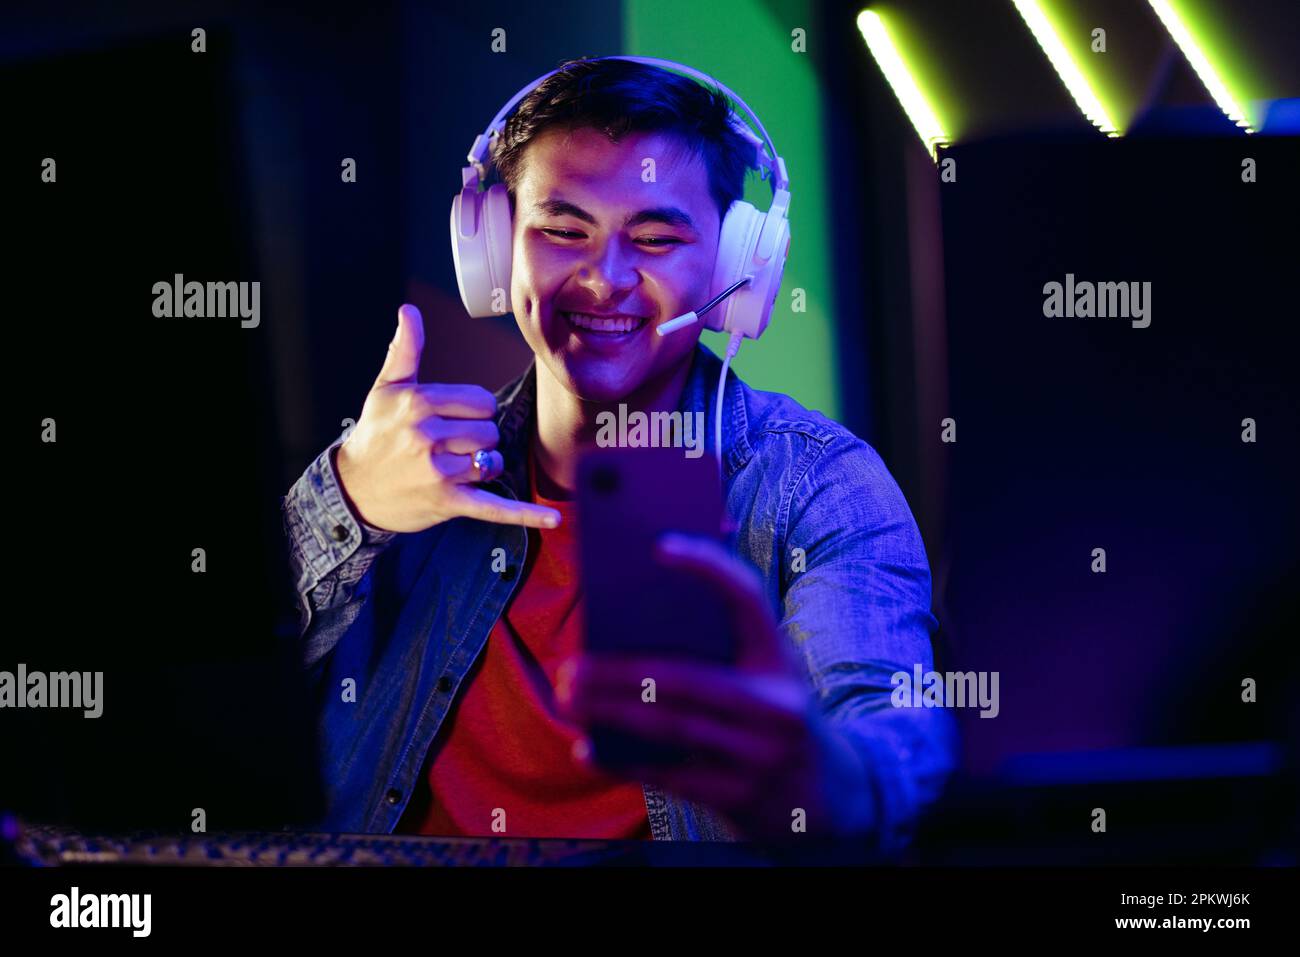 Smiling Gen Z gamer connecting with streamers and players in an online gaming community using a smartphone. With a headset on, he engages in a live vi Stock Photo